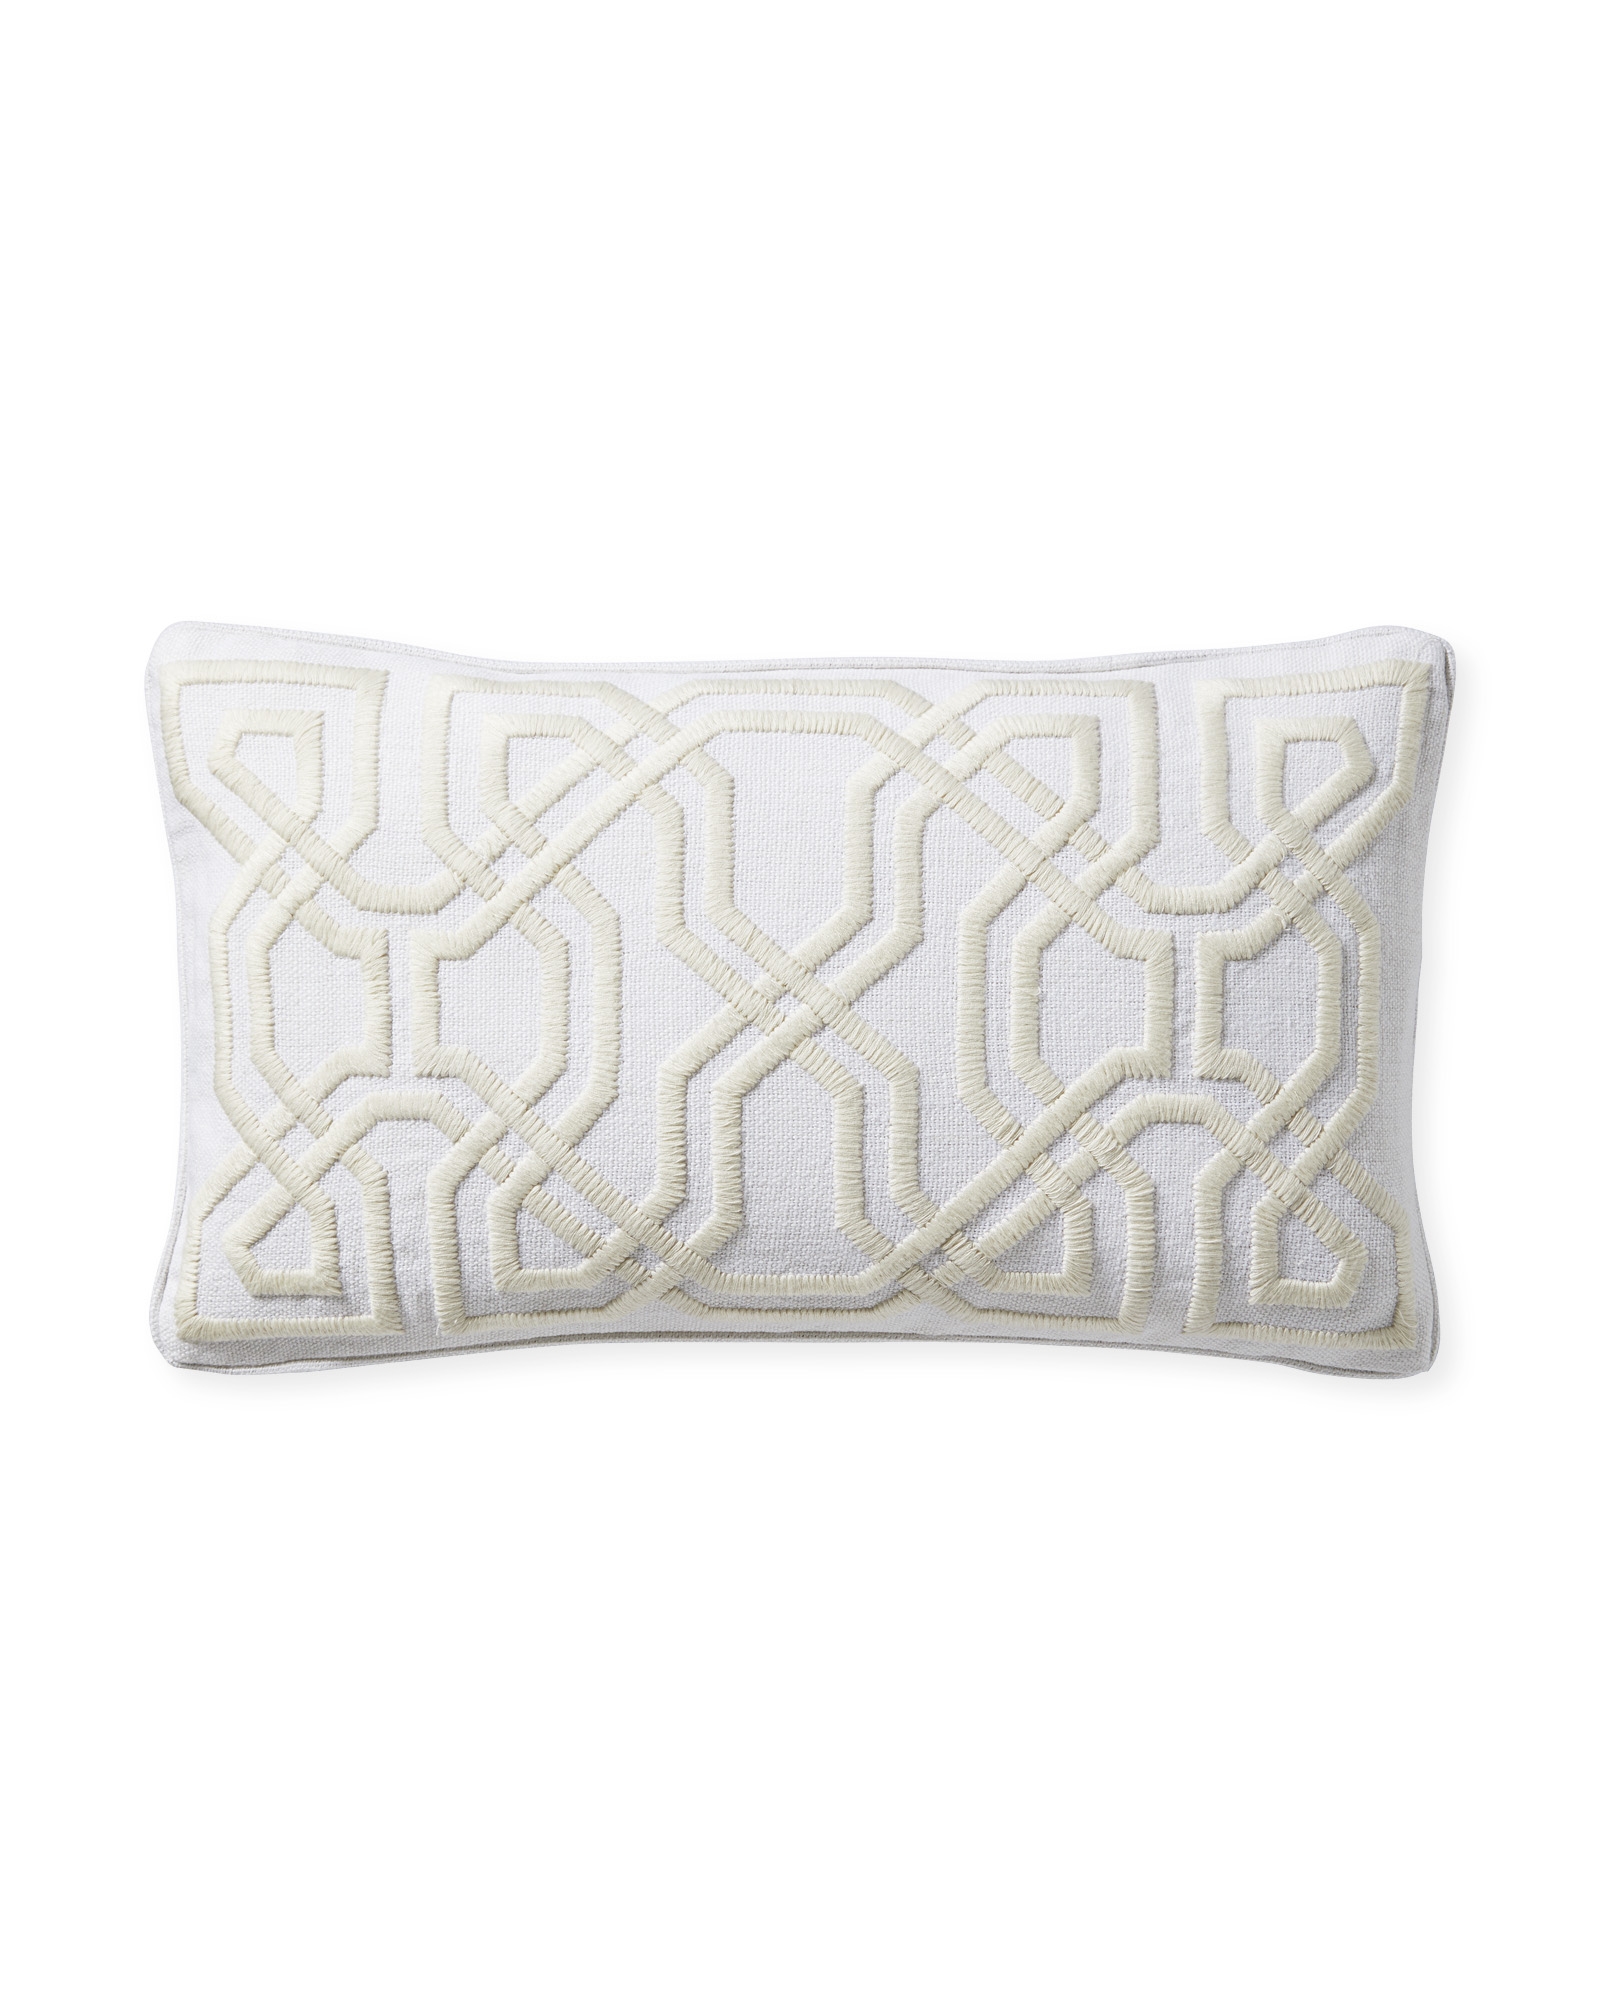 Jetty Pillow Cover - Ivory - Insert sold separately - Image 0